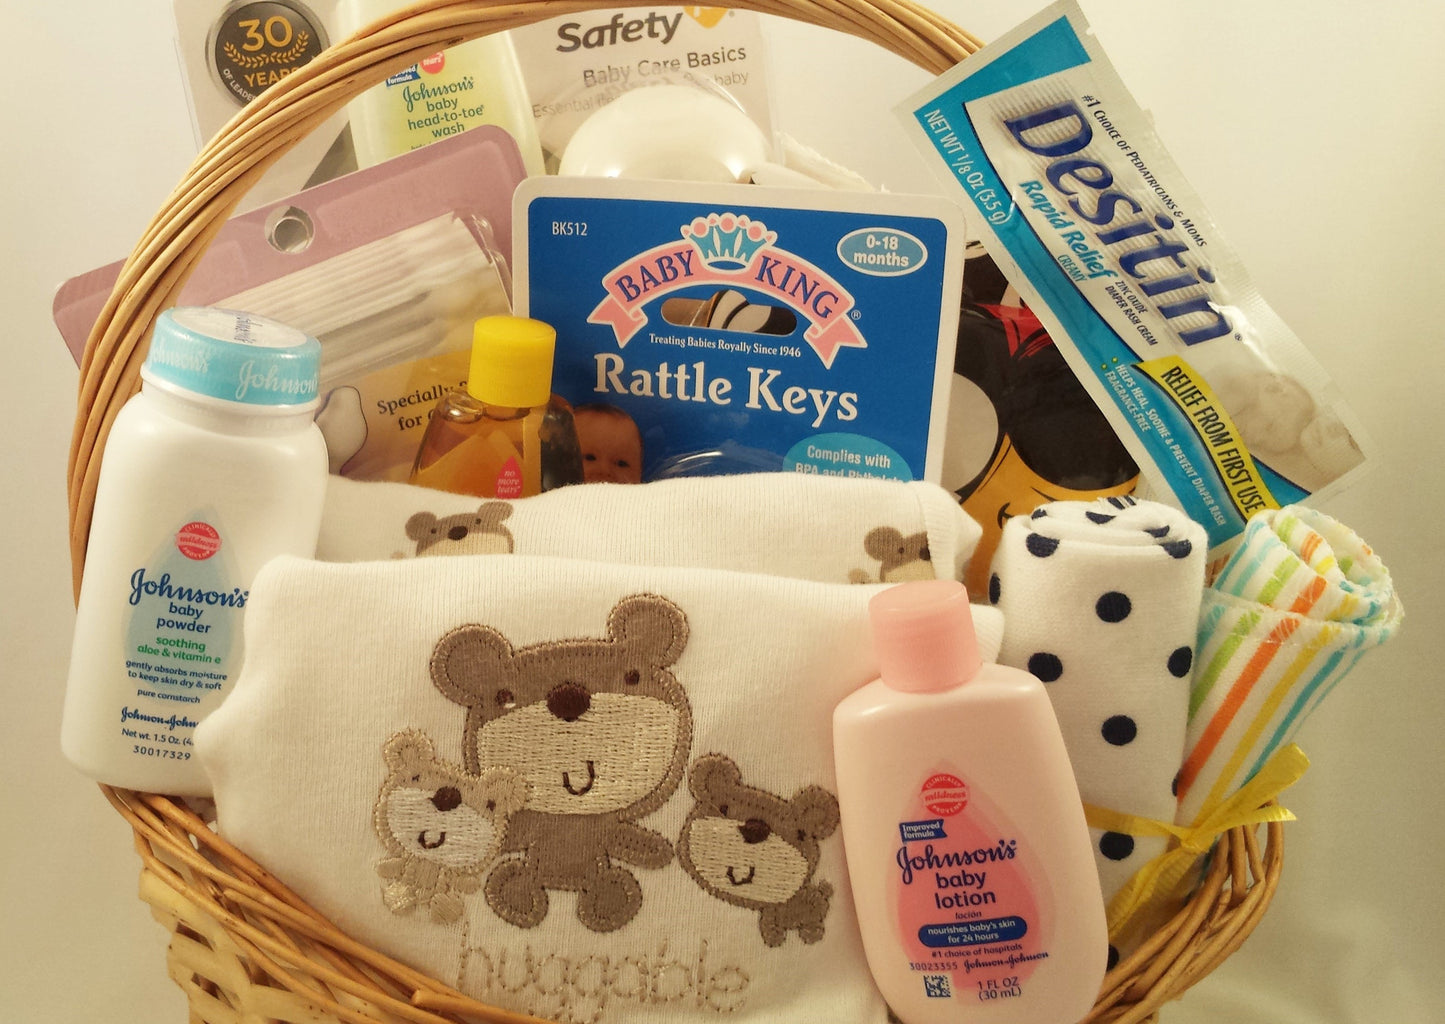 The Gift Basket That All New Parents Really Need - A Prioritized